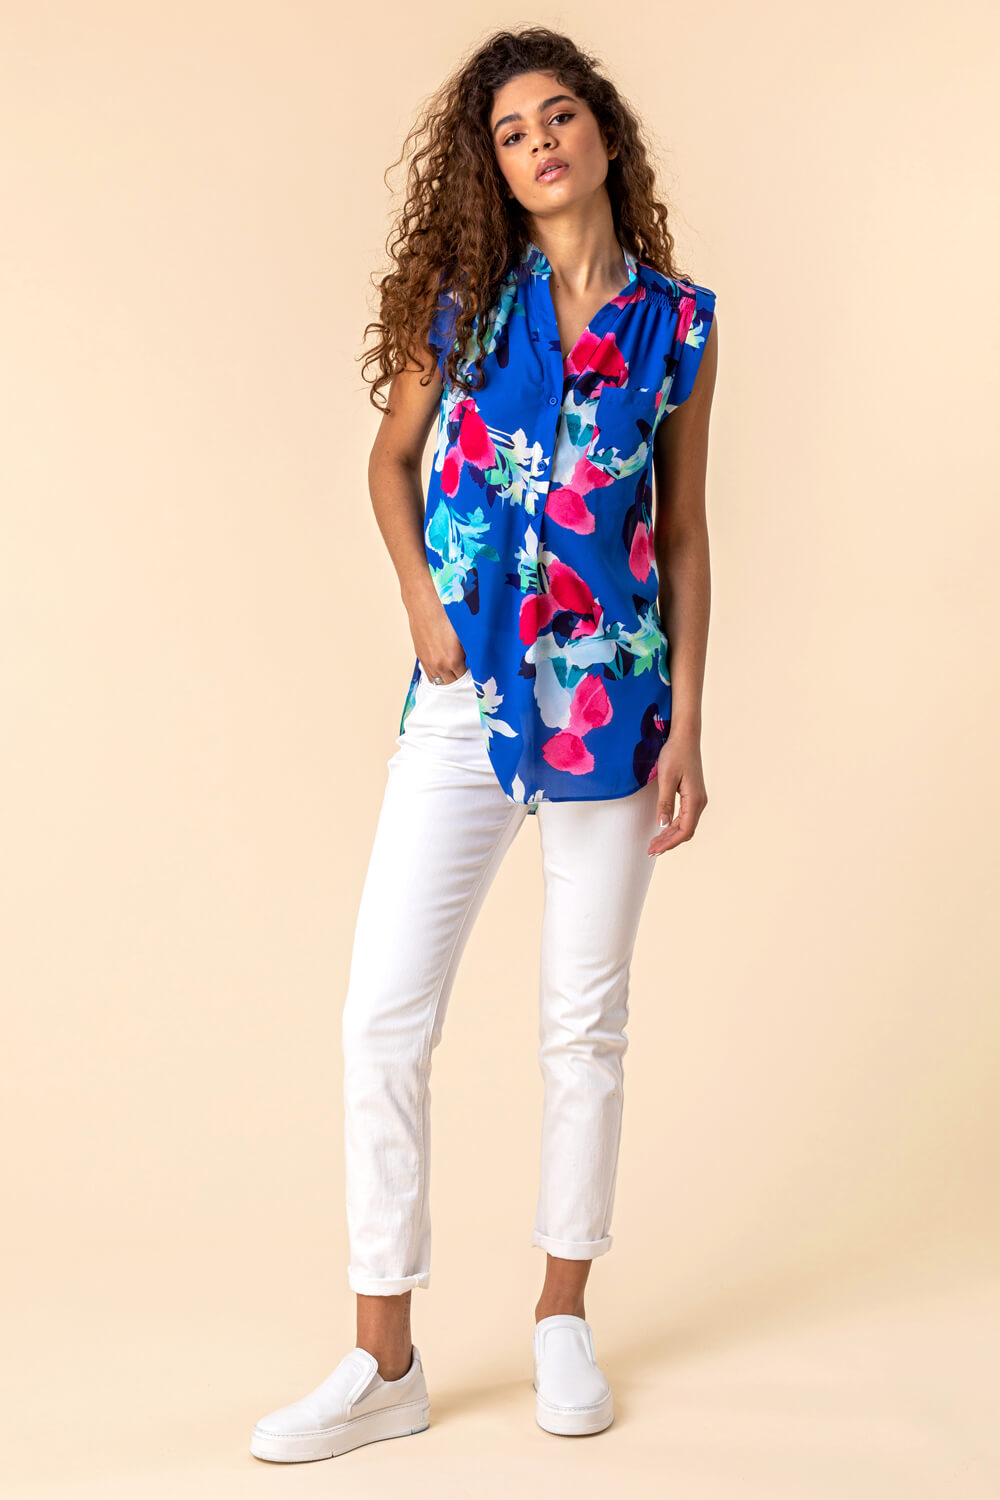 Royal Blue Floral Print Tunic Top, Image 3 of 5